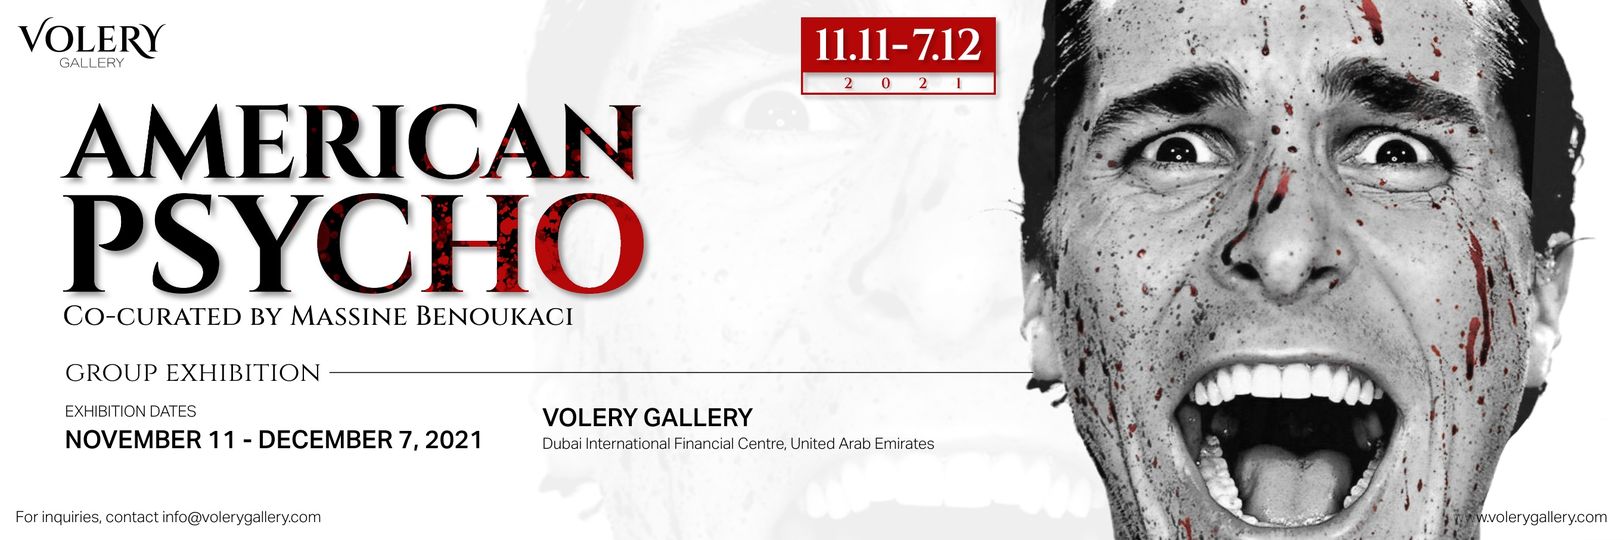 “American Psycho” Group Exhibition - Coming Soon in UAE